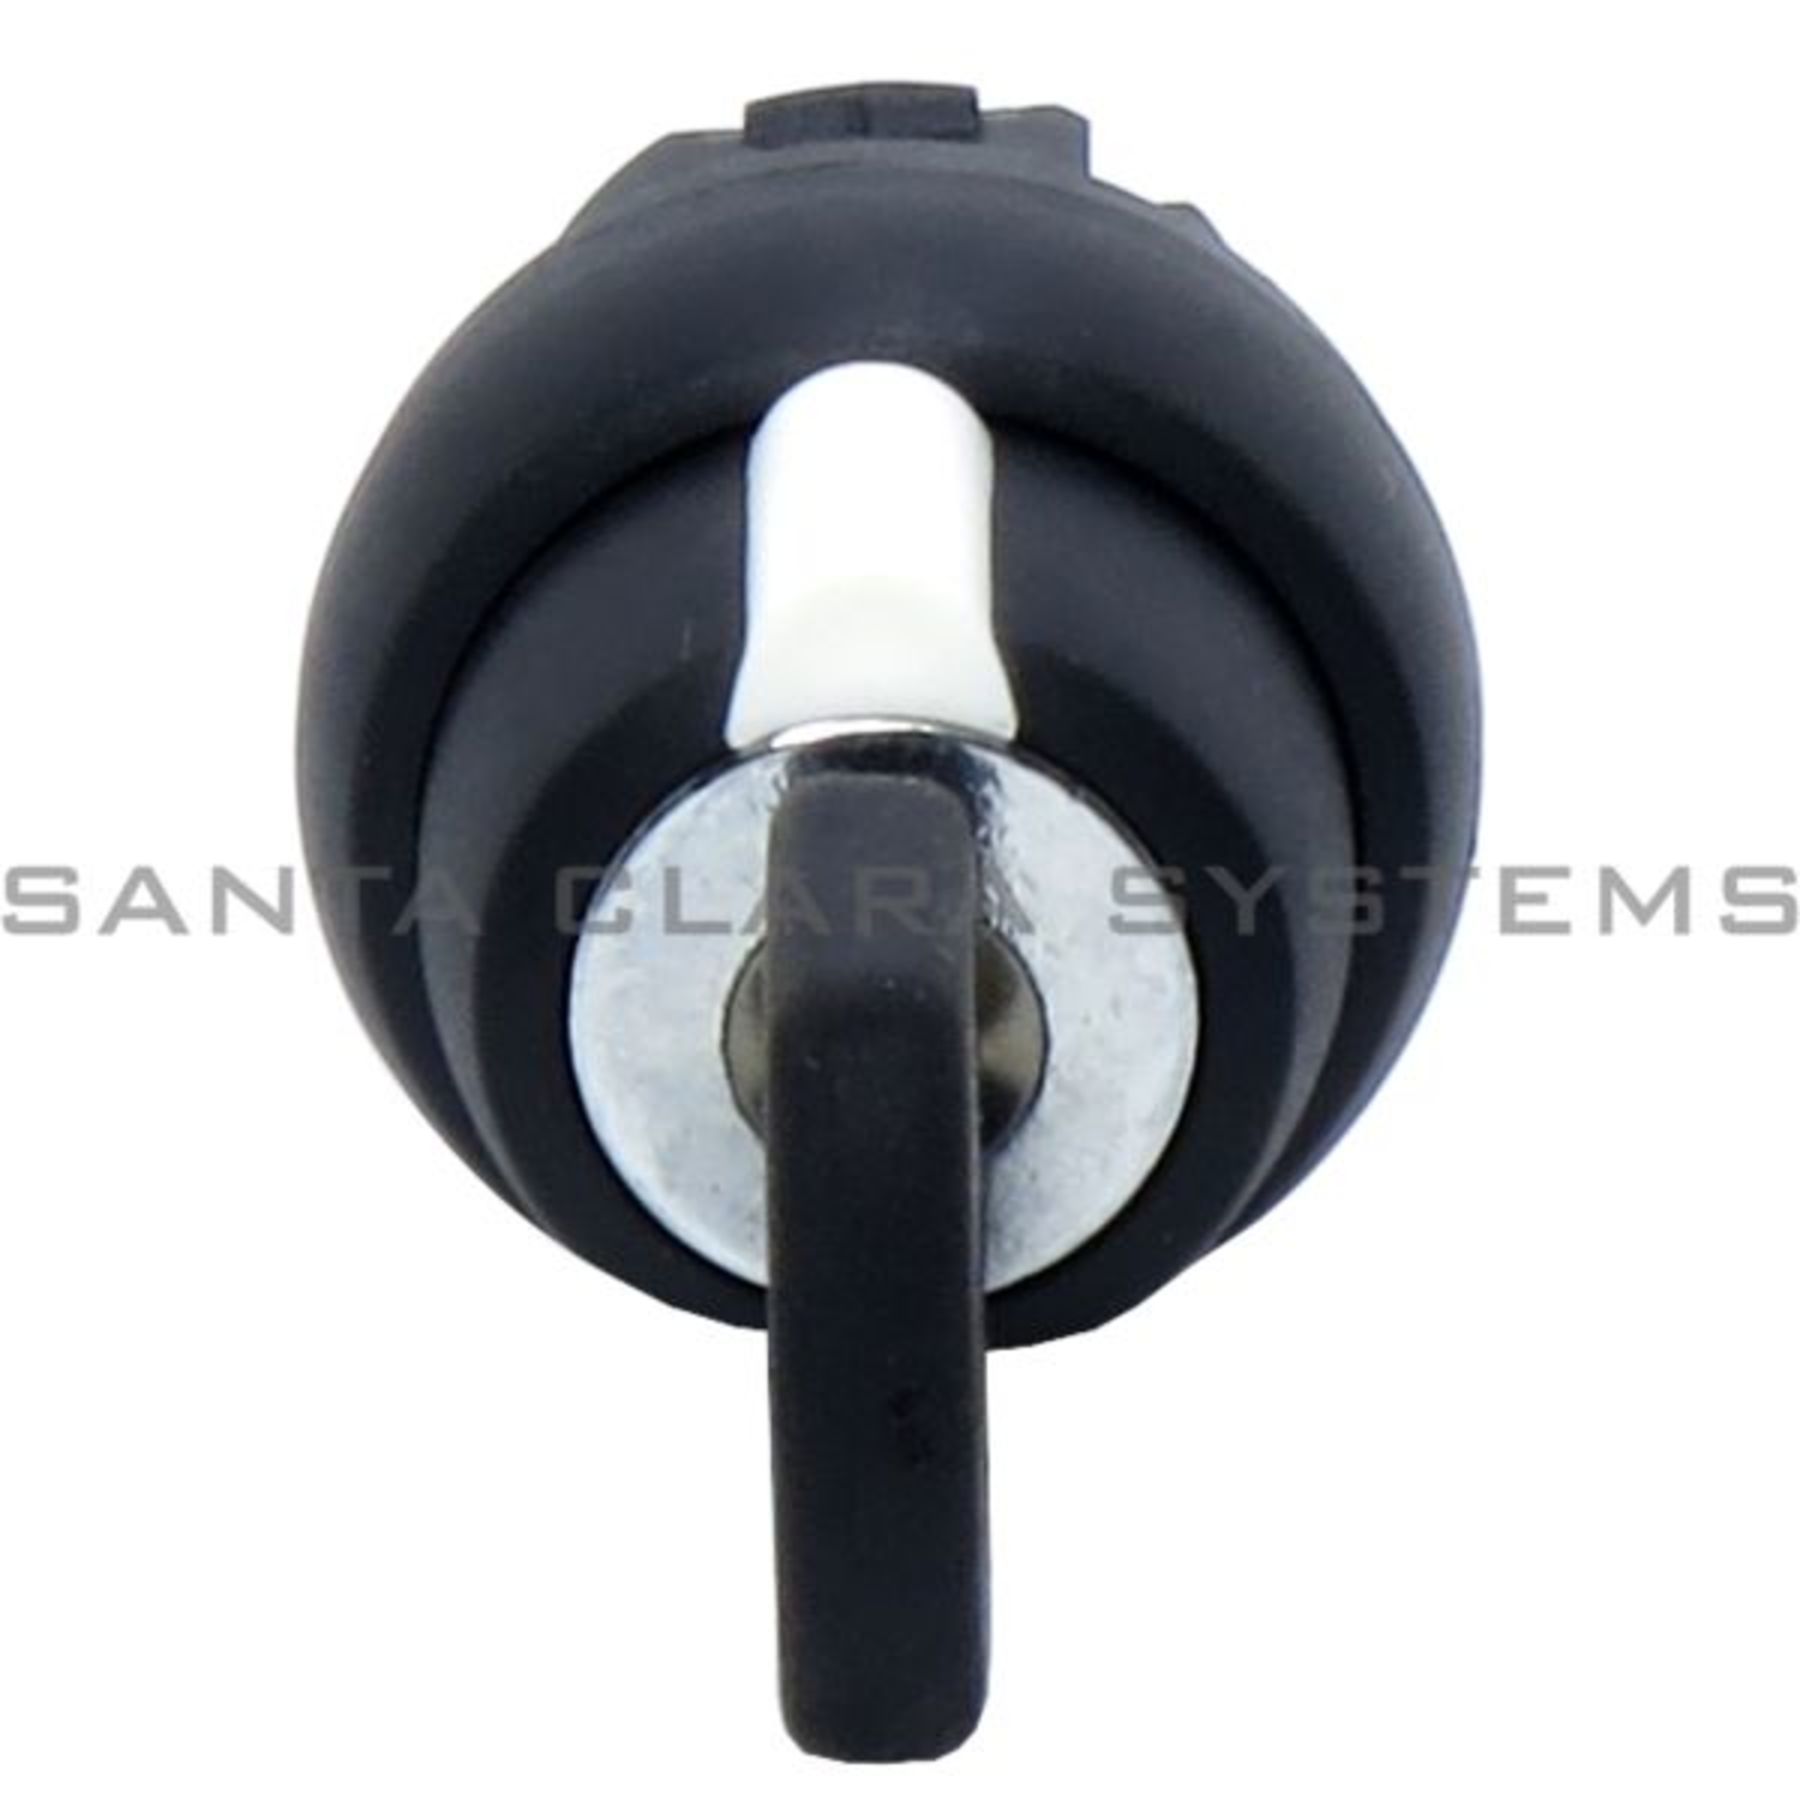 800fp Km31 Key Operated Selector Switch Plastic In Stock And Ready To Ship Santa Clara Systems